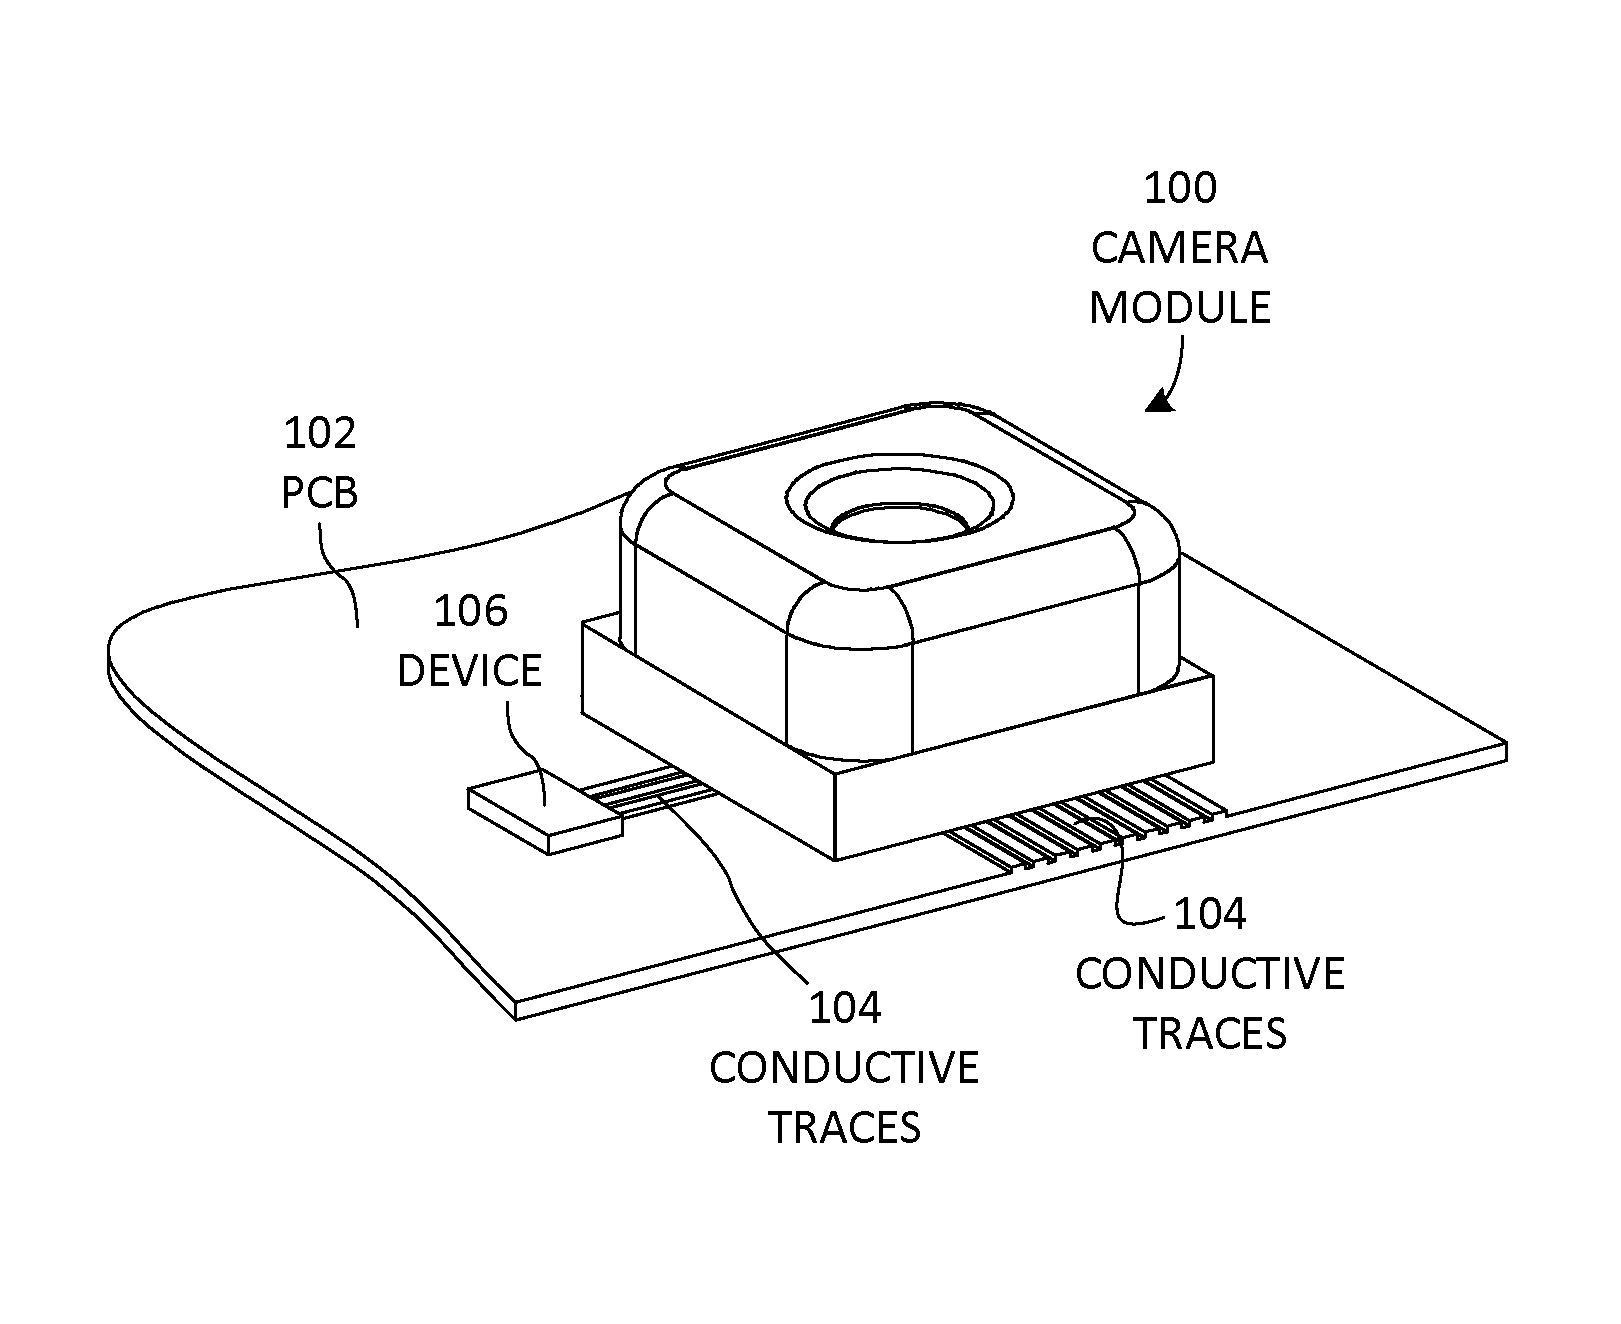 Small form factor modules using wafer level optics with bottom cavity and flip-chip assembly